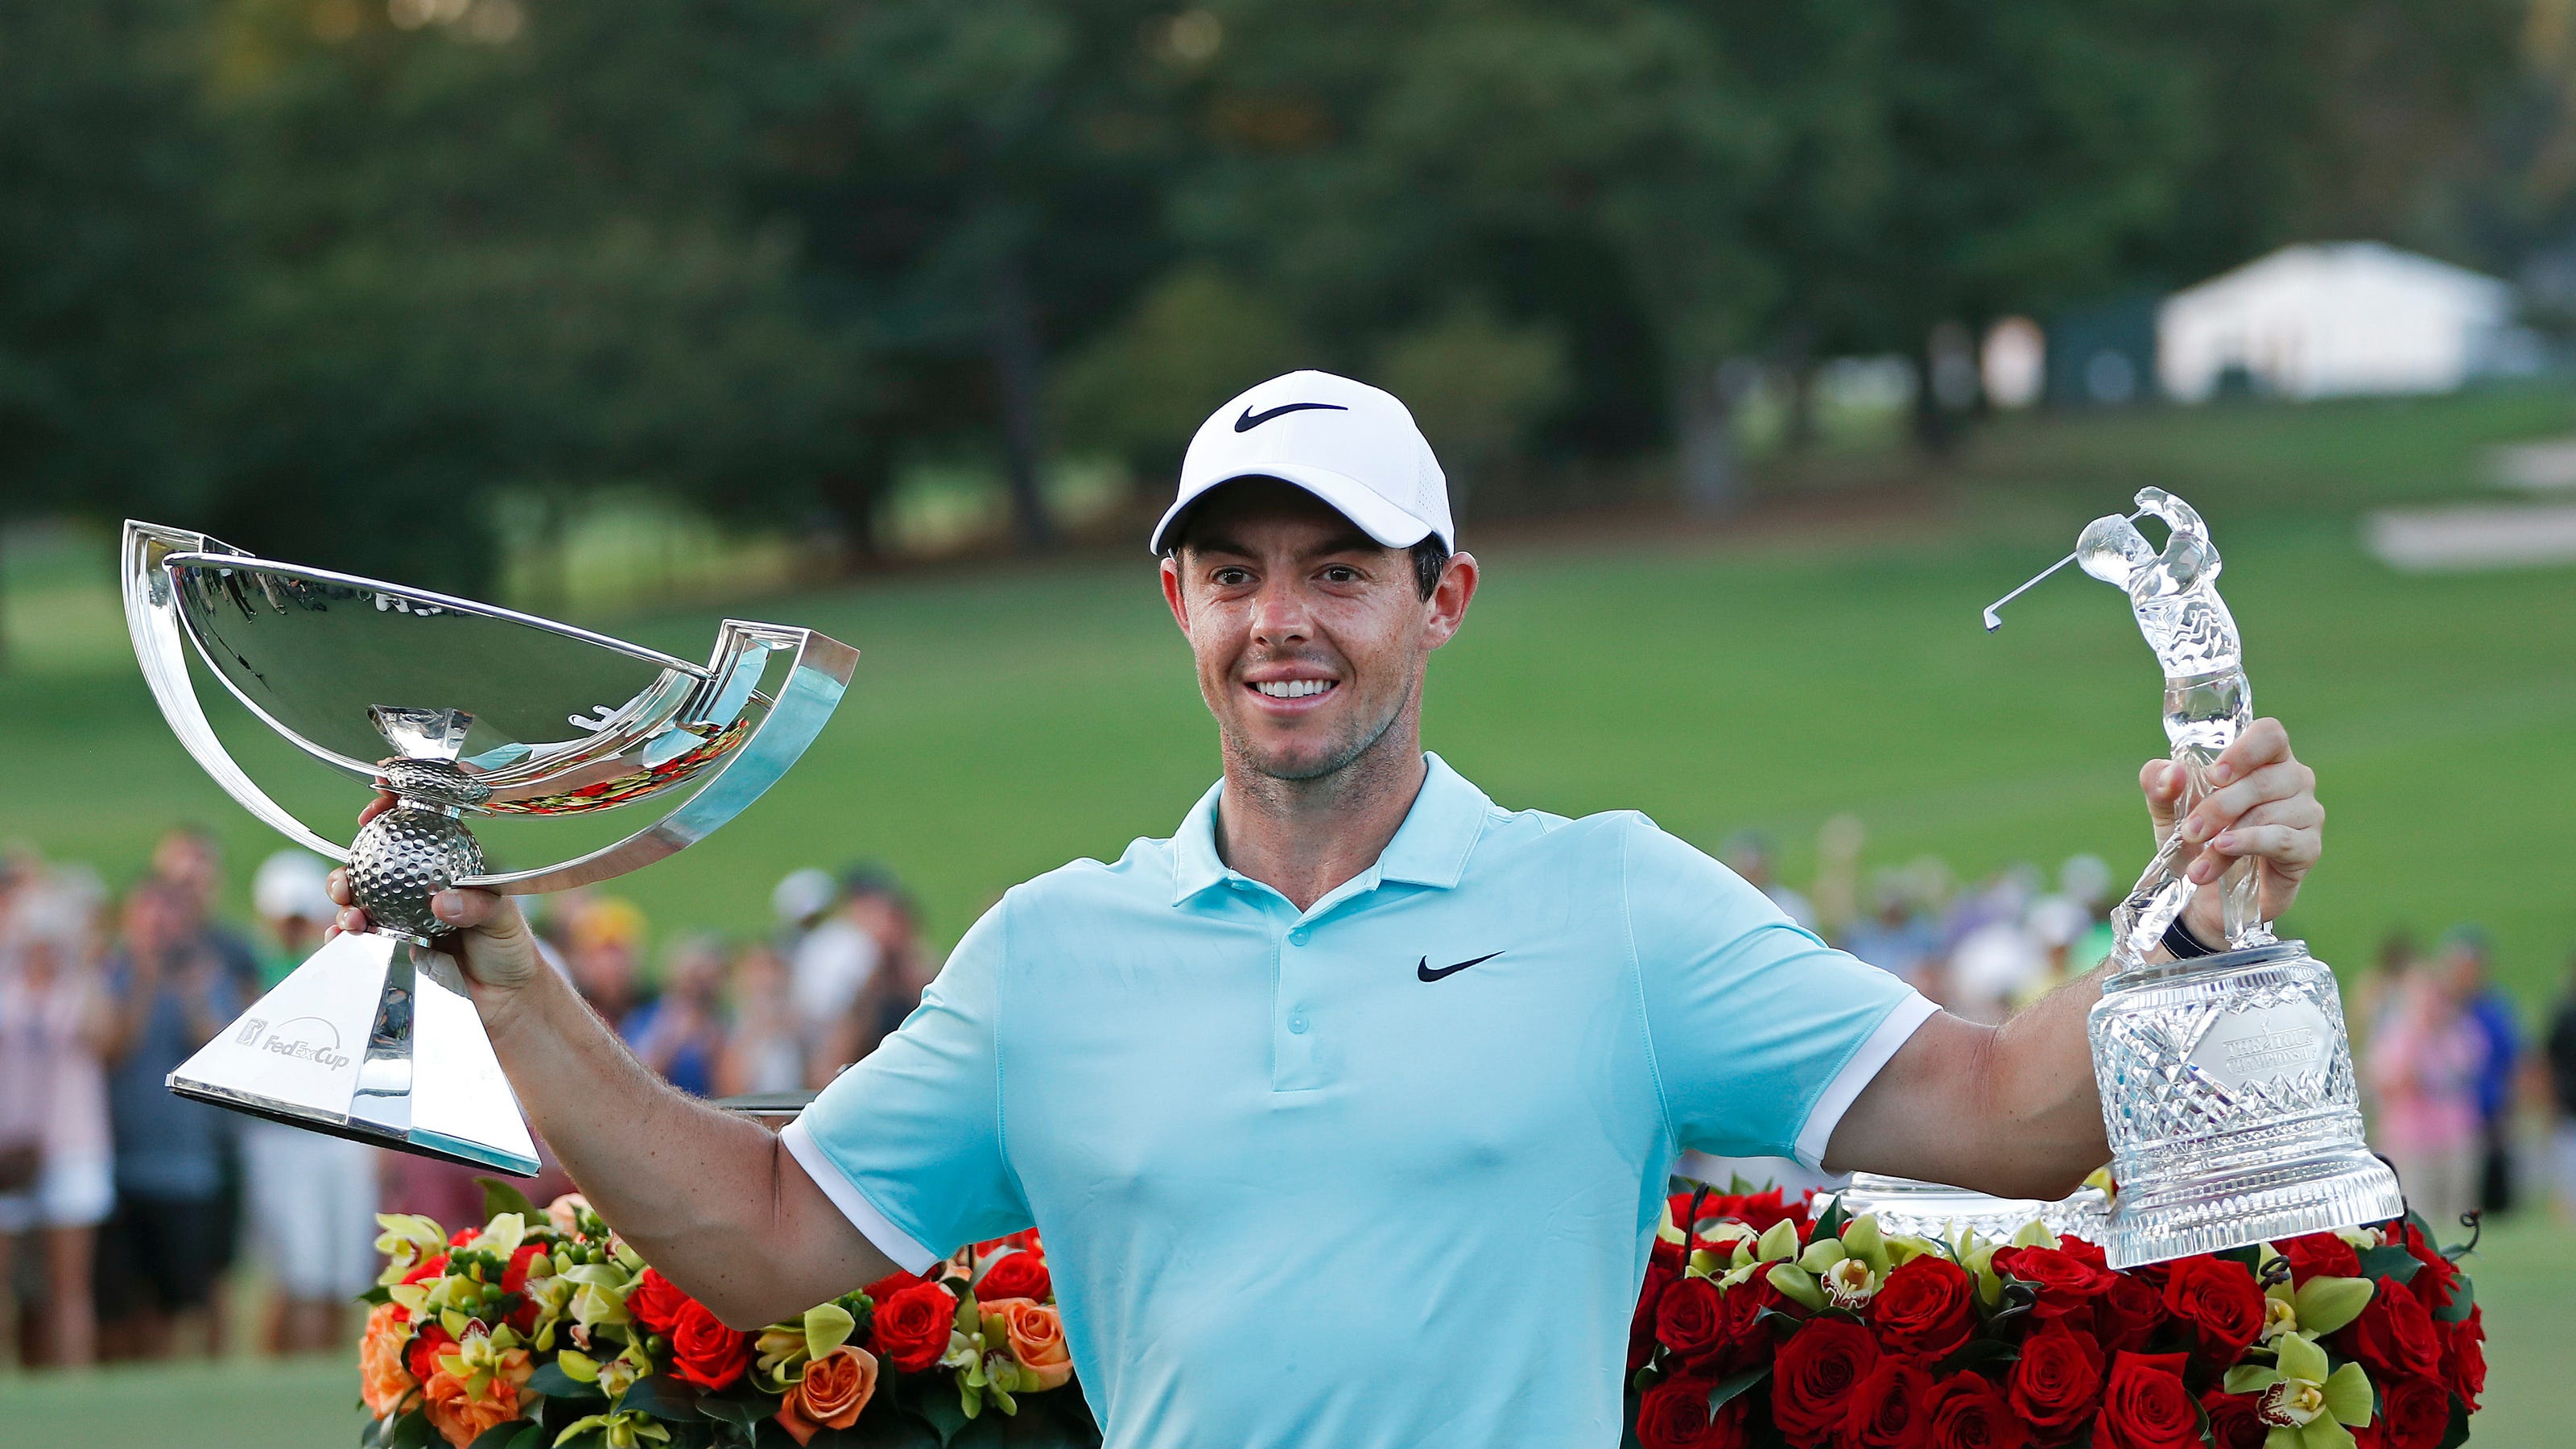 2 trophies on the line as PGA Tour season ends at East Lake